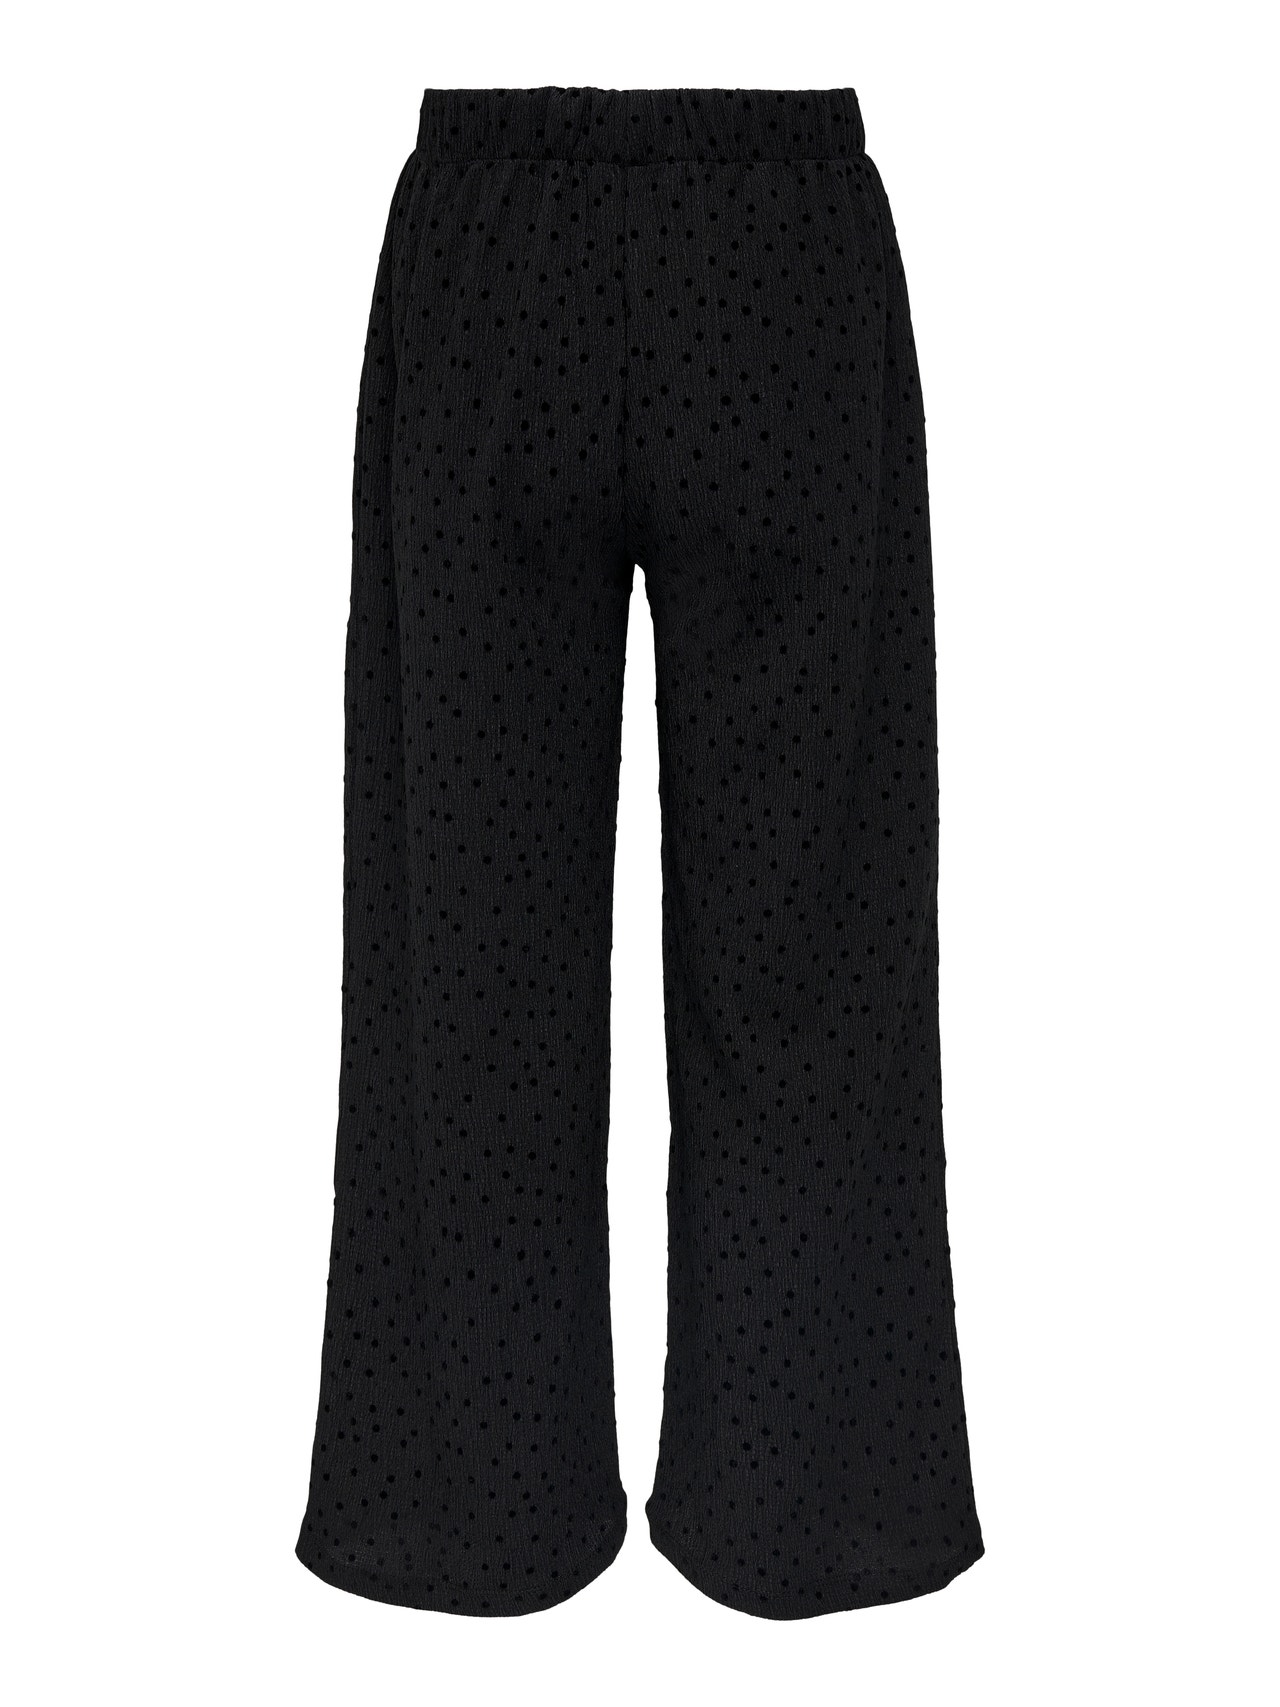 ONLY Wide fit pants -Black - 15278146